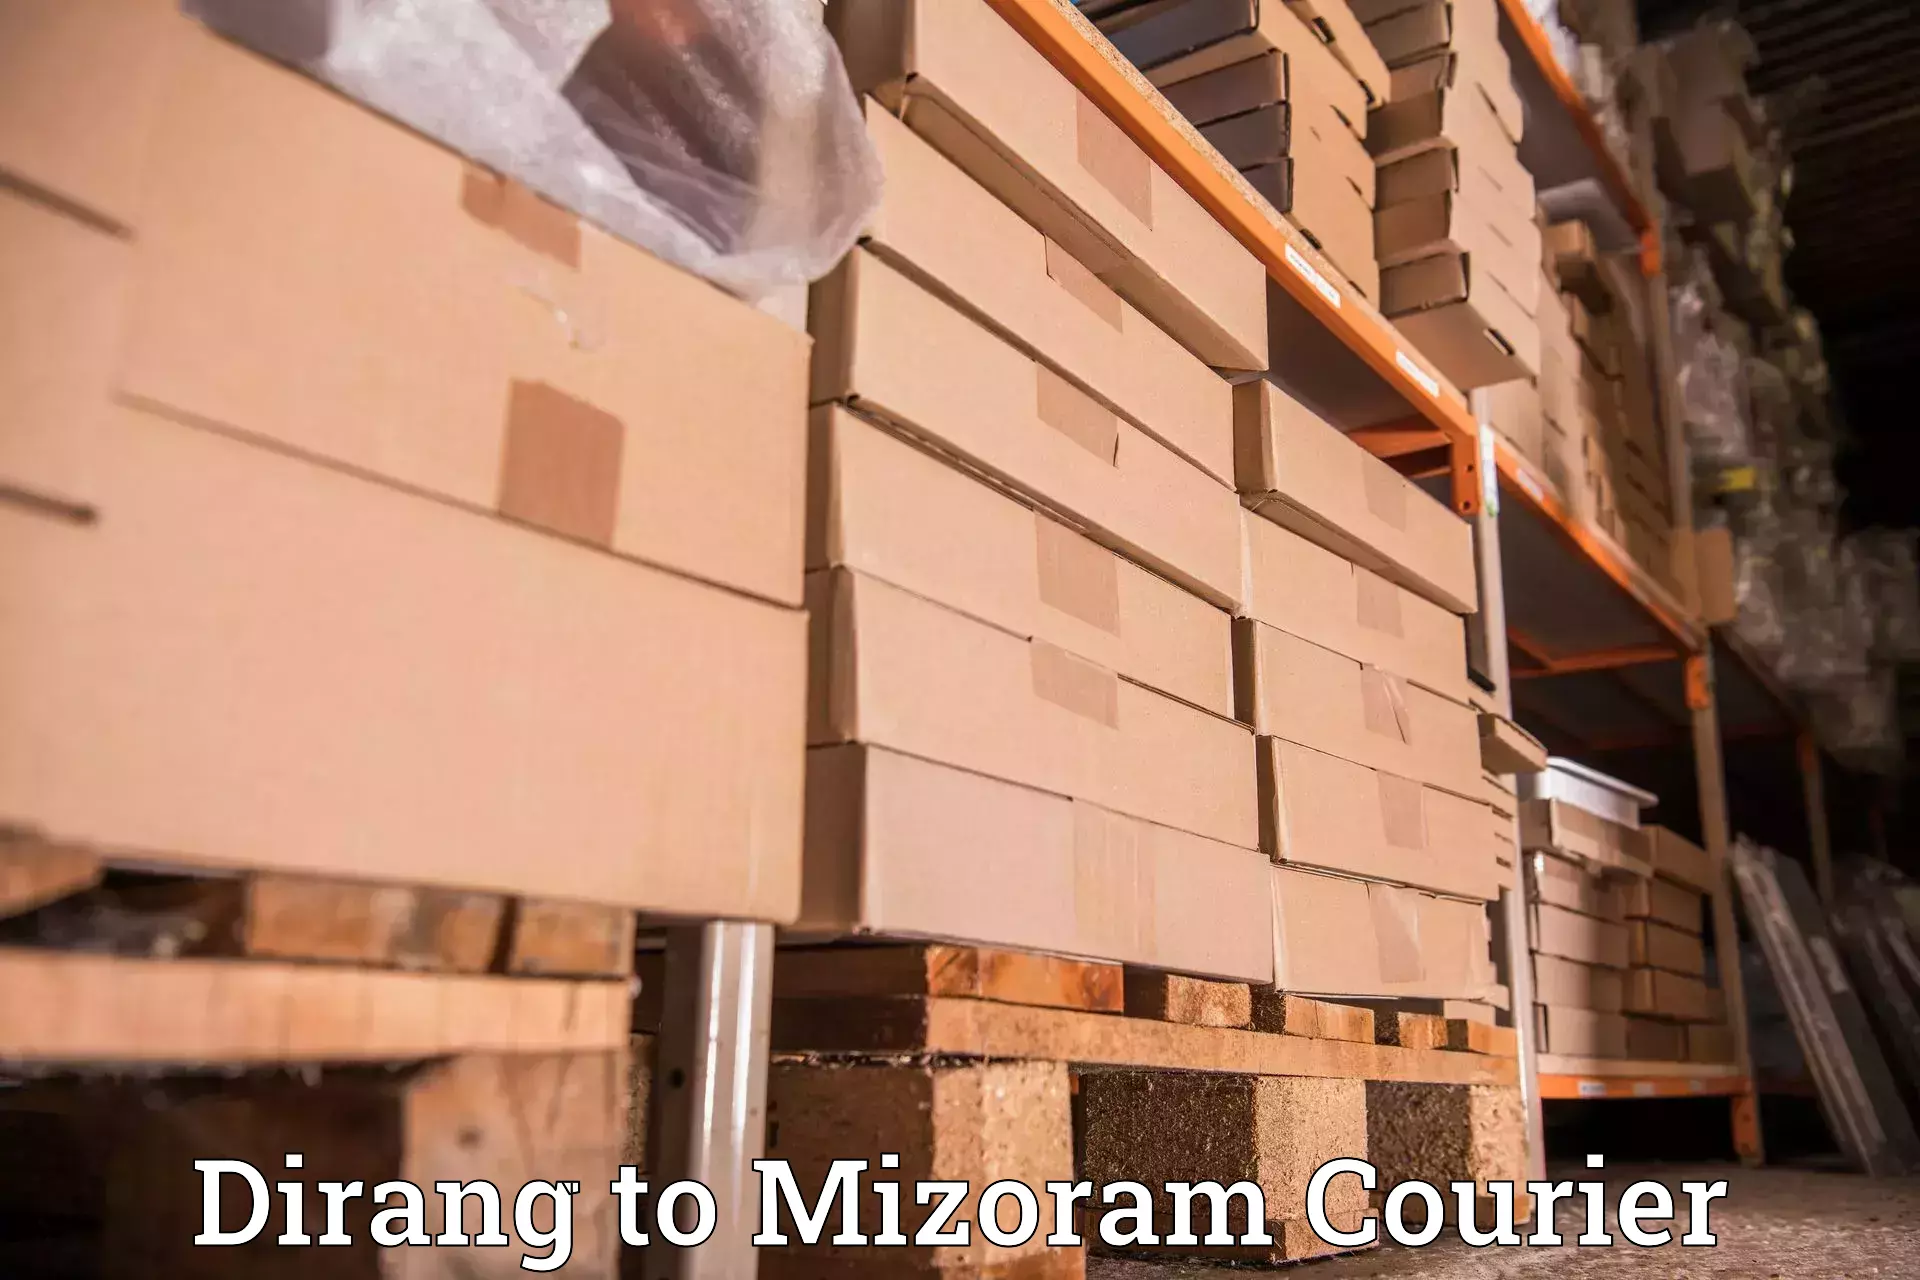 Parcel service for businesses Dirang to Darlawn